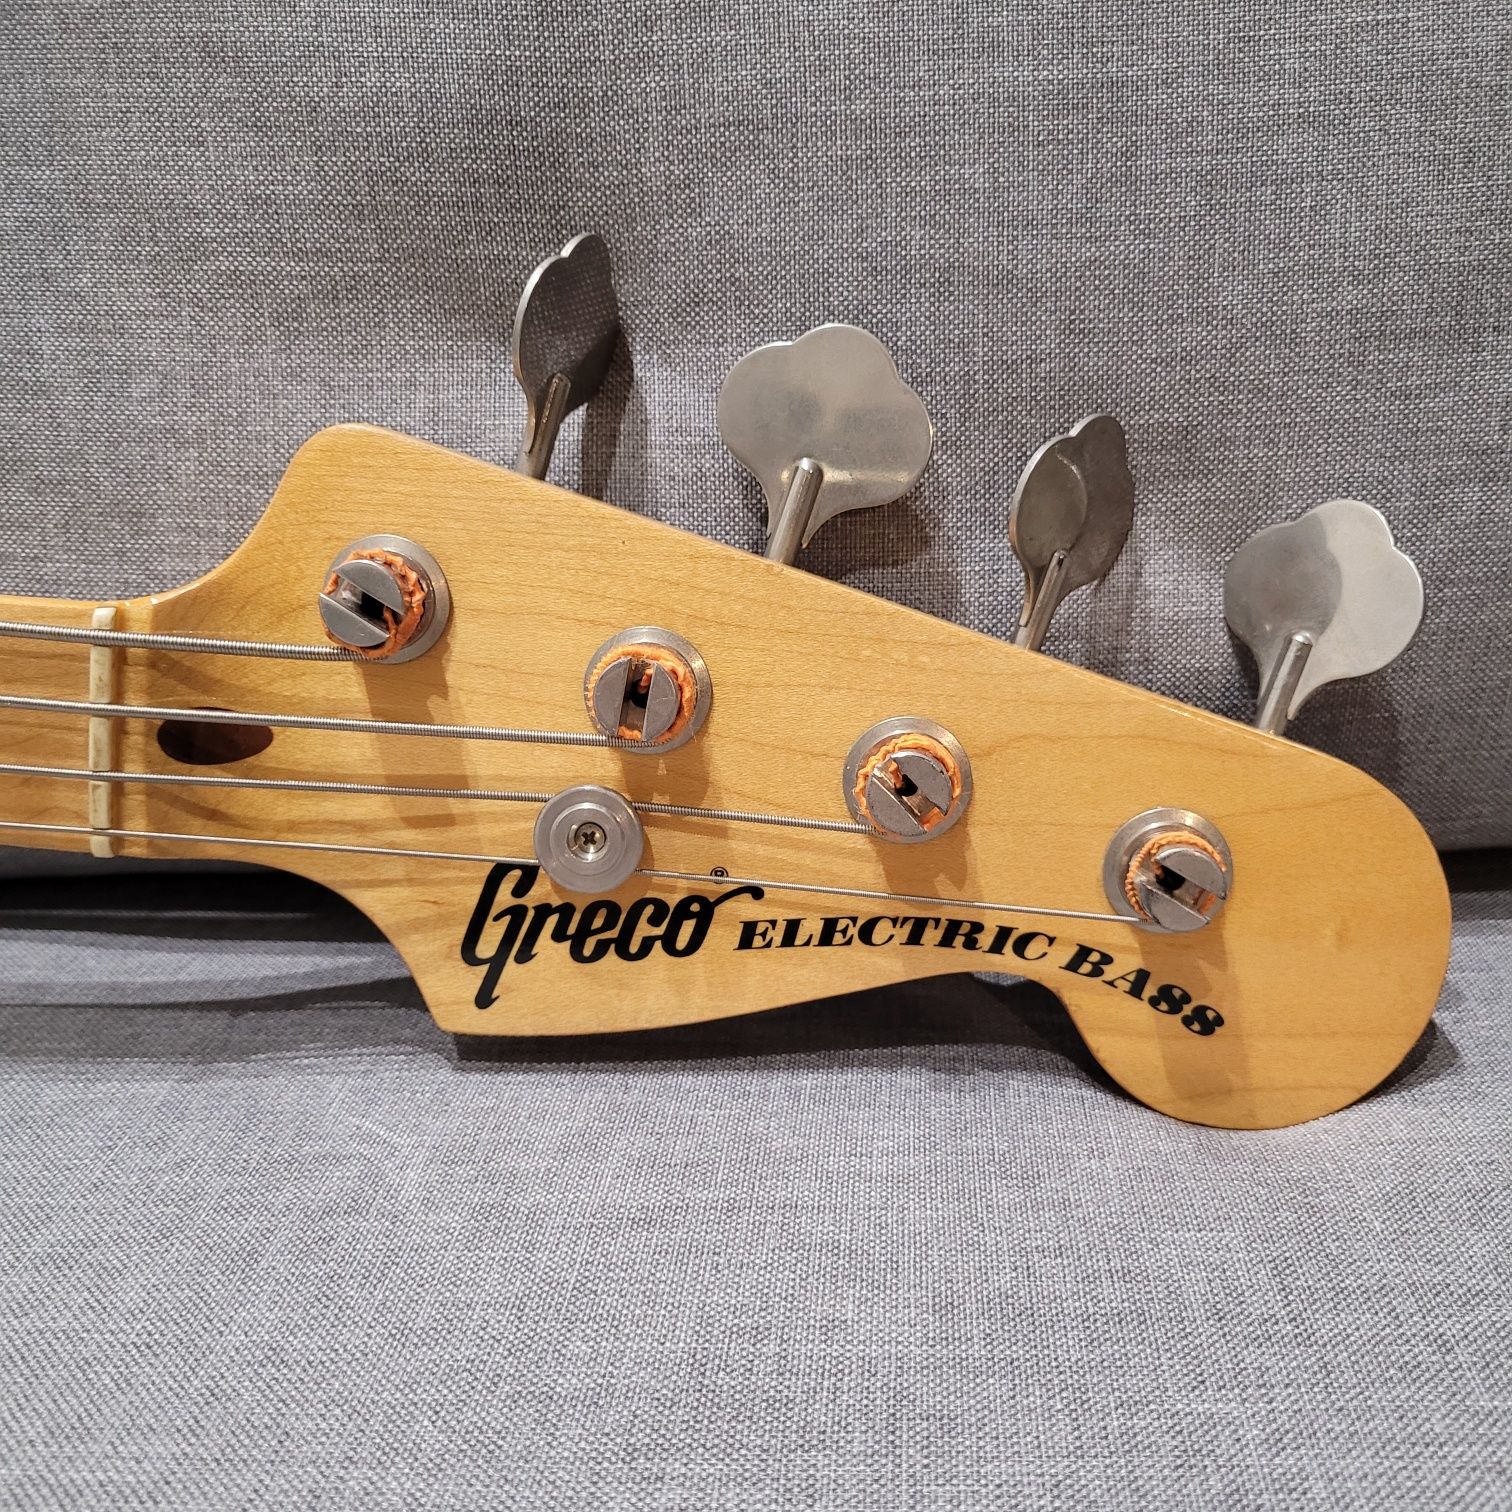 Greco Electric Bass Precision Bass Japan 1976